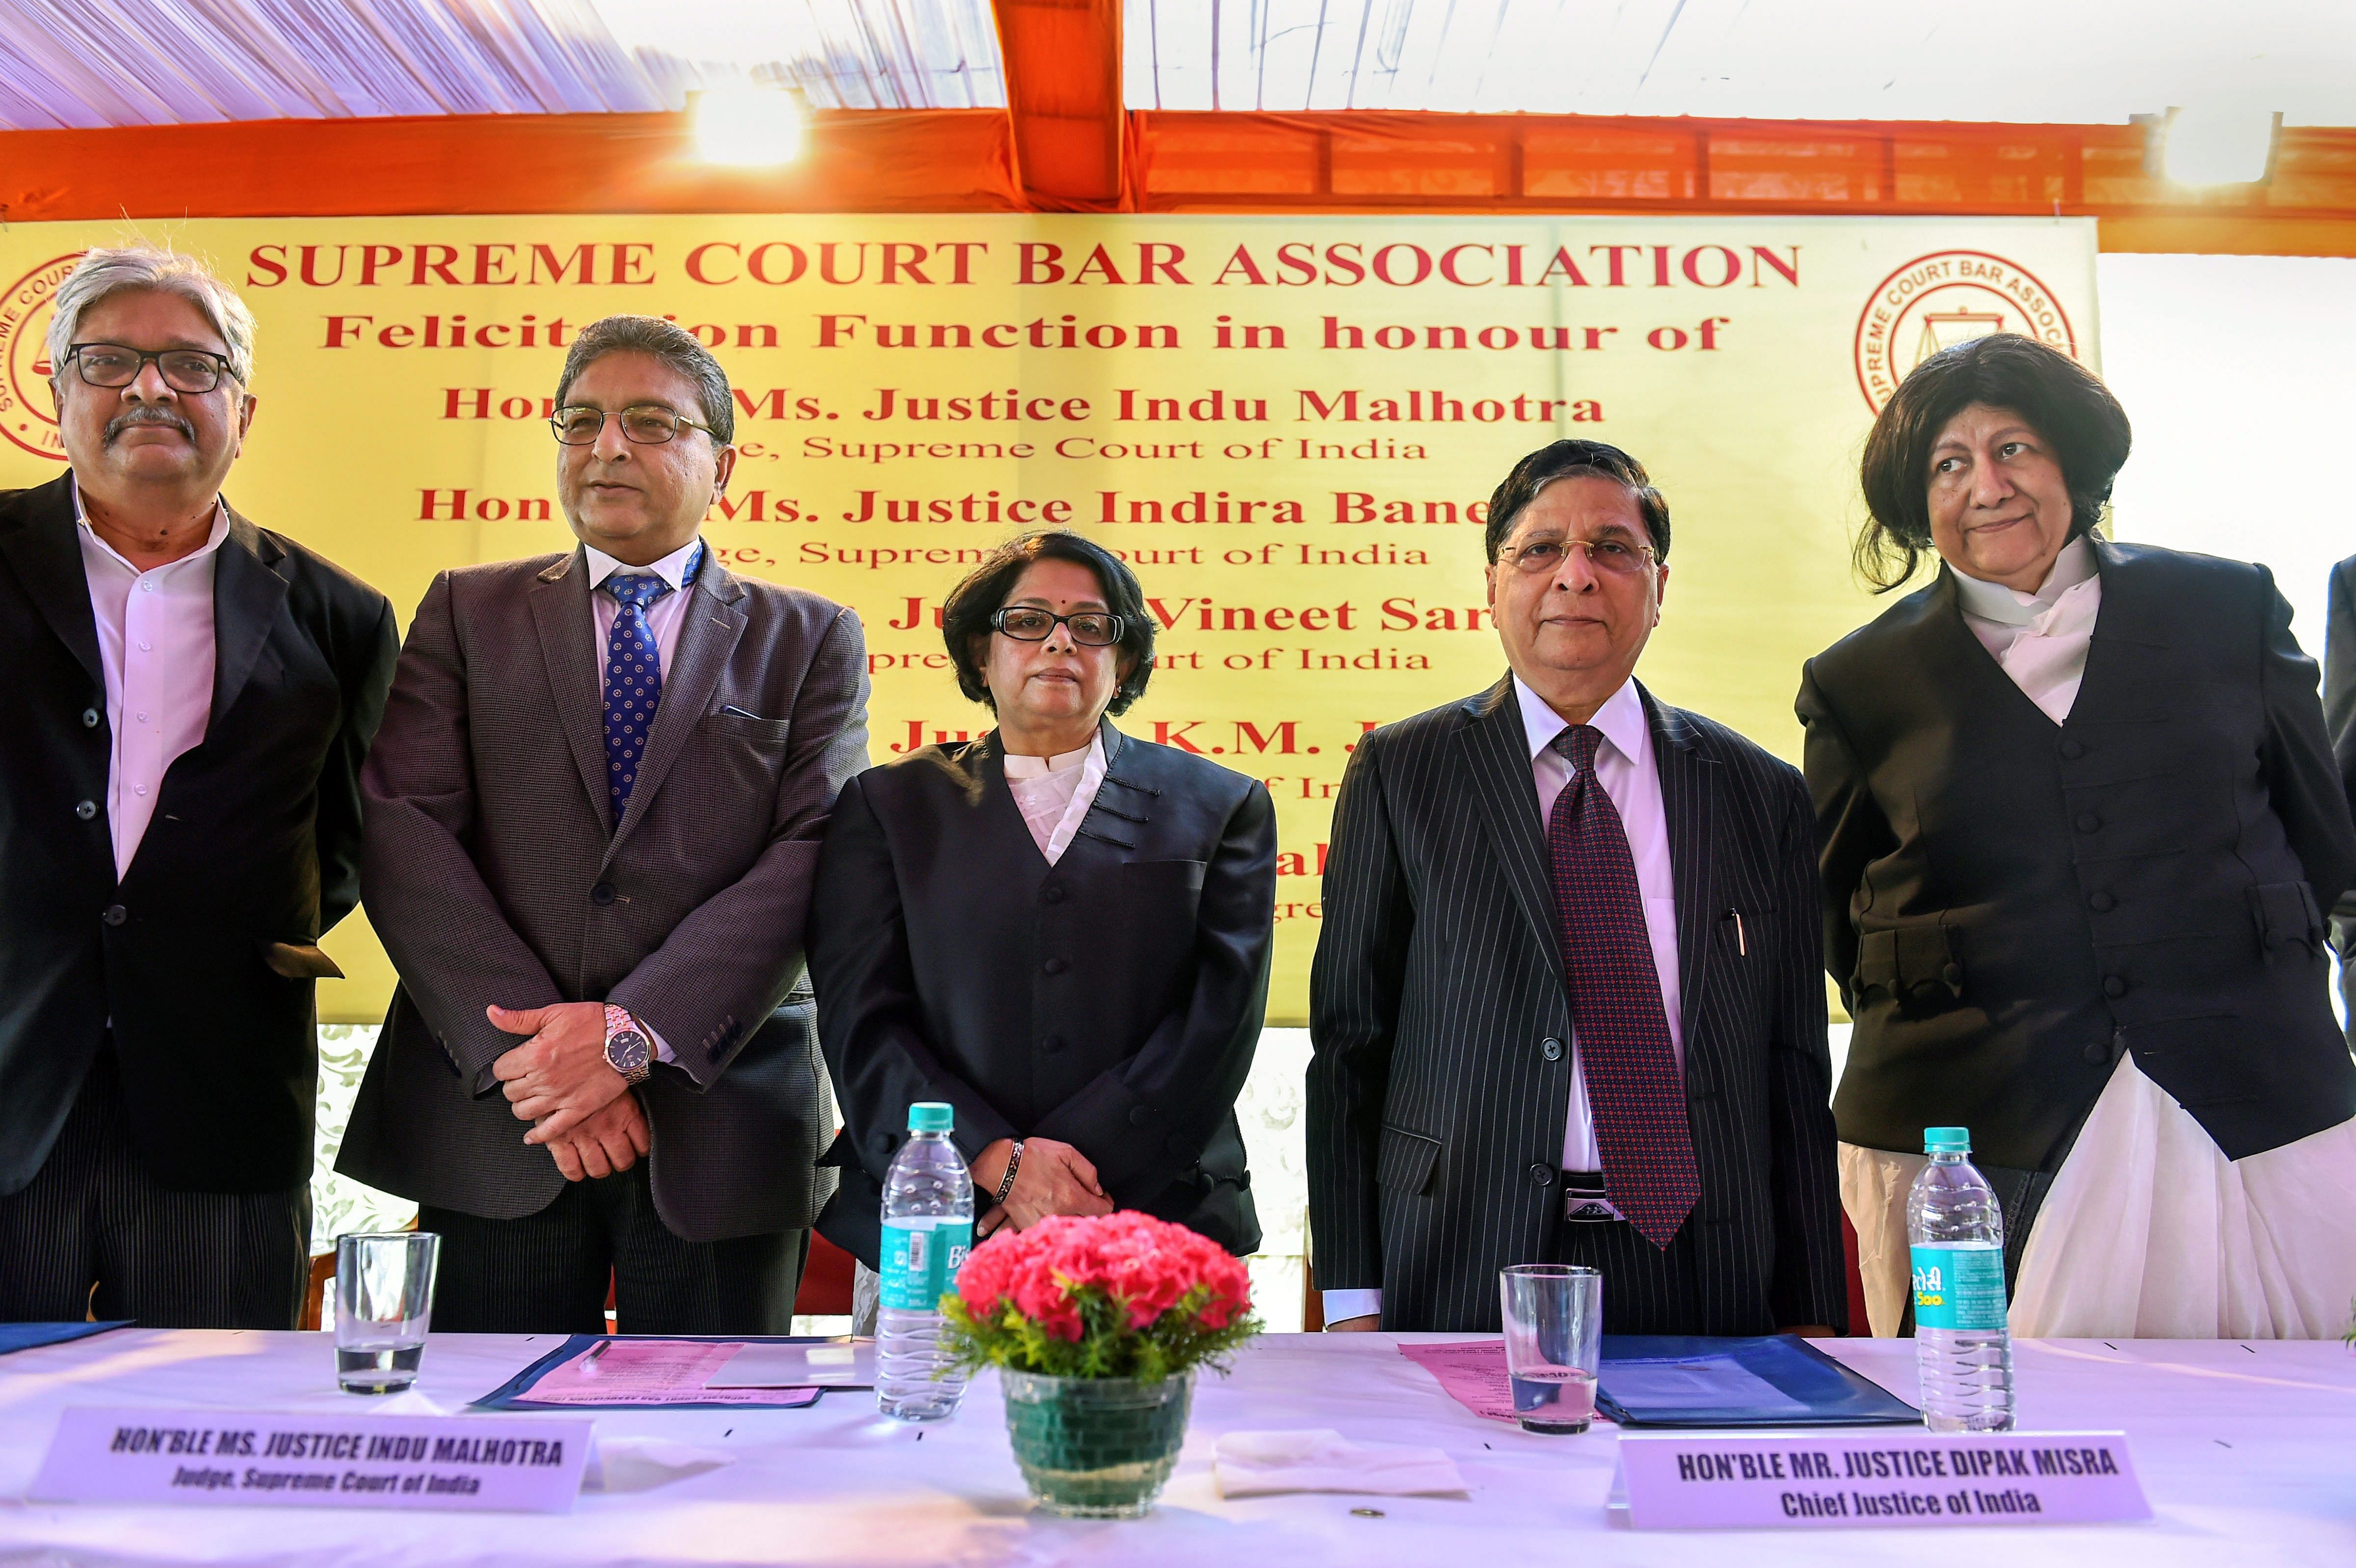 CJI Justice Dipak Misra (2nd R) during the felicitation function of Supreme Court Judges (L-R) Justice KM Joseph, Justice Vineet Saran, Justice Indu Malhotra, Justice Indira Banerjee at Supreme Court, in New Delhi on Tuesday, Aug 14, 2018. PTI